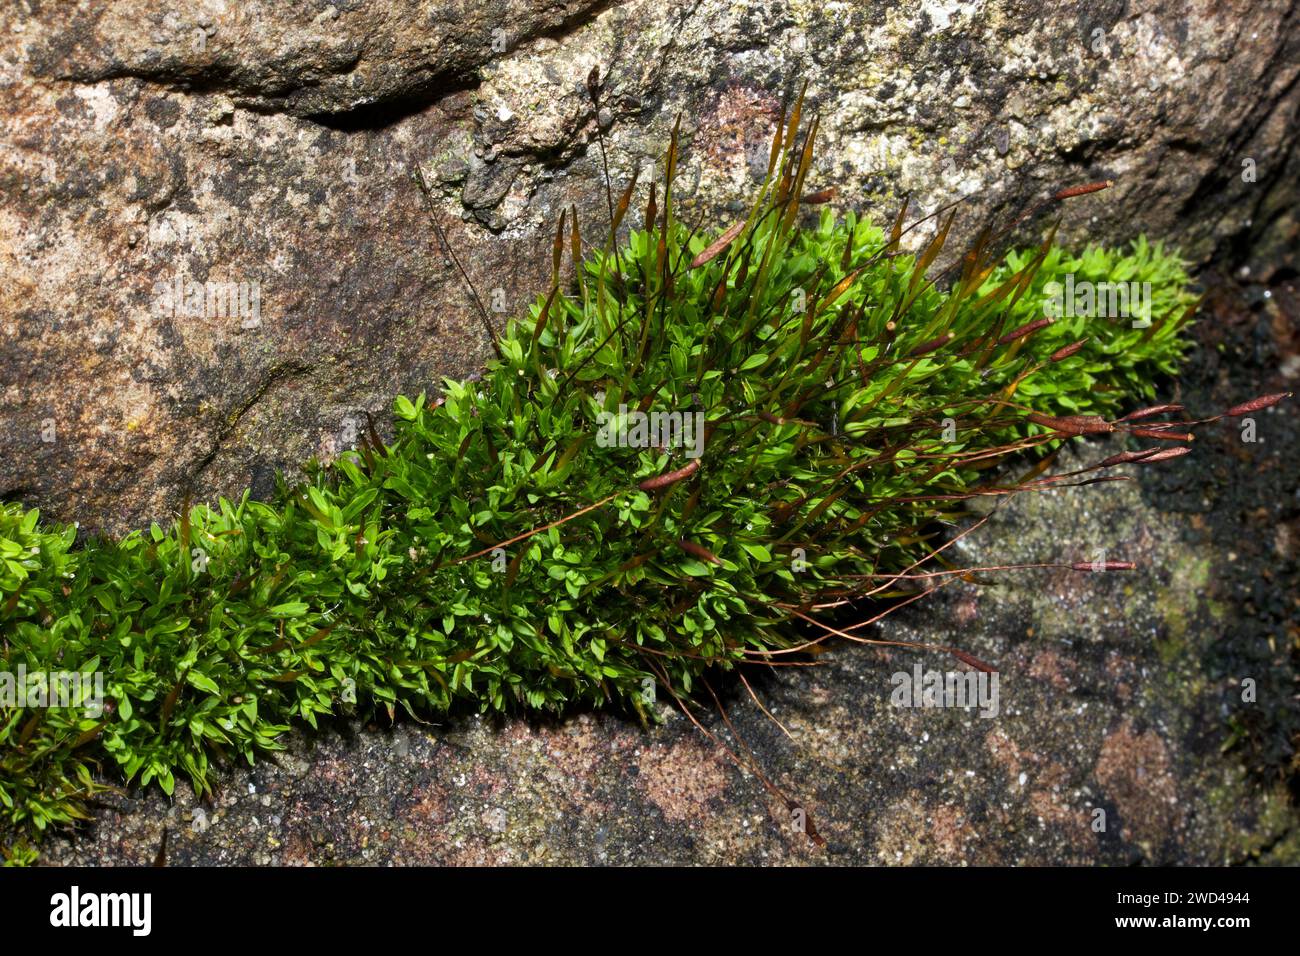 Tortula muralis (wall-screw moss) is mostly found in urban areas on walls including concrete and cement. It has a worldwide distribution. Stock Photo